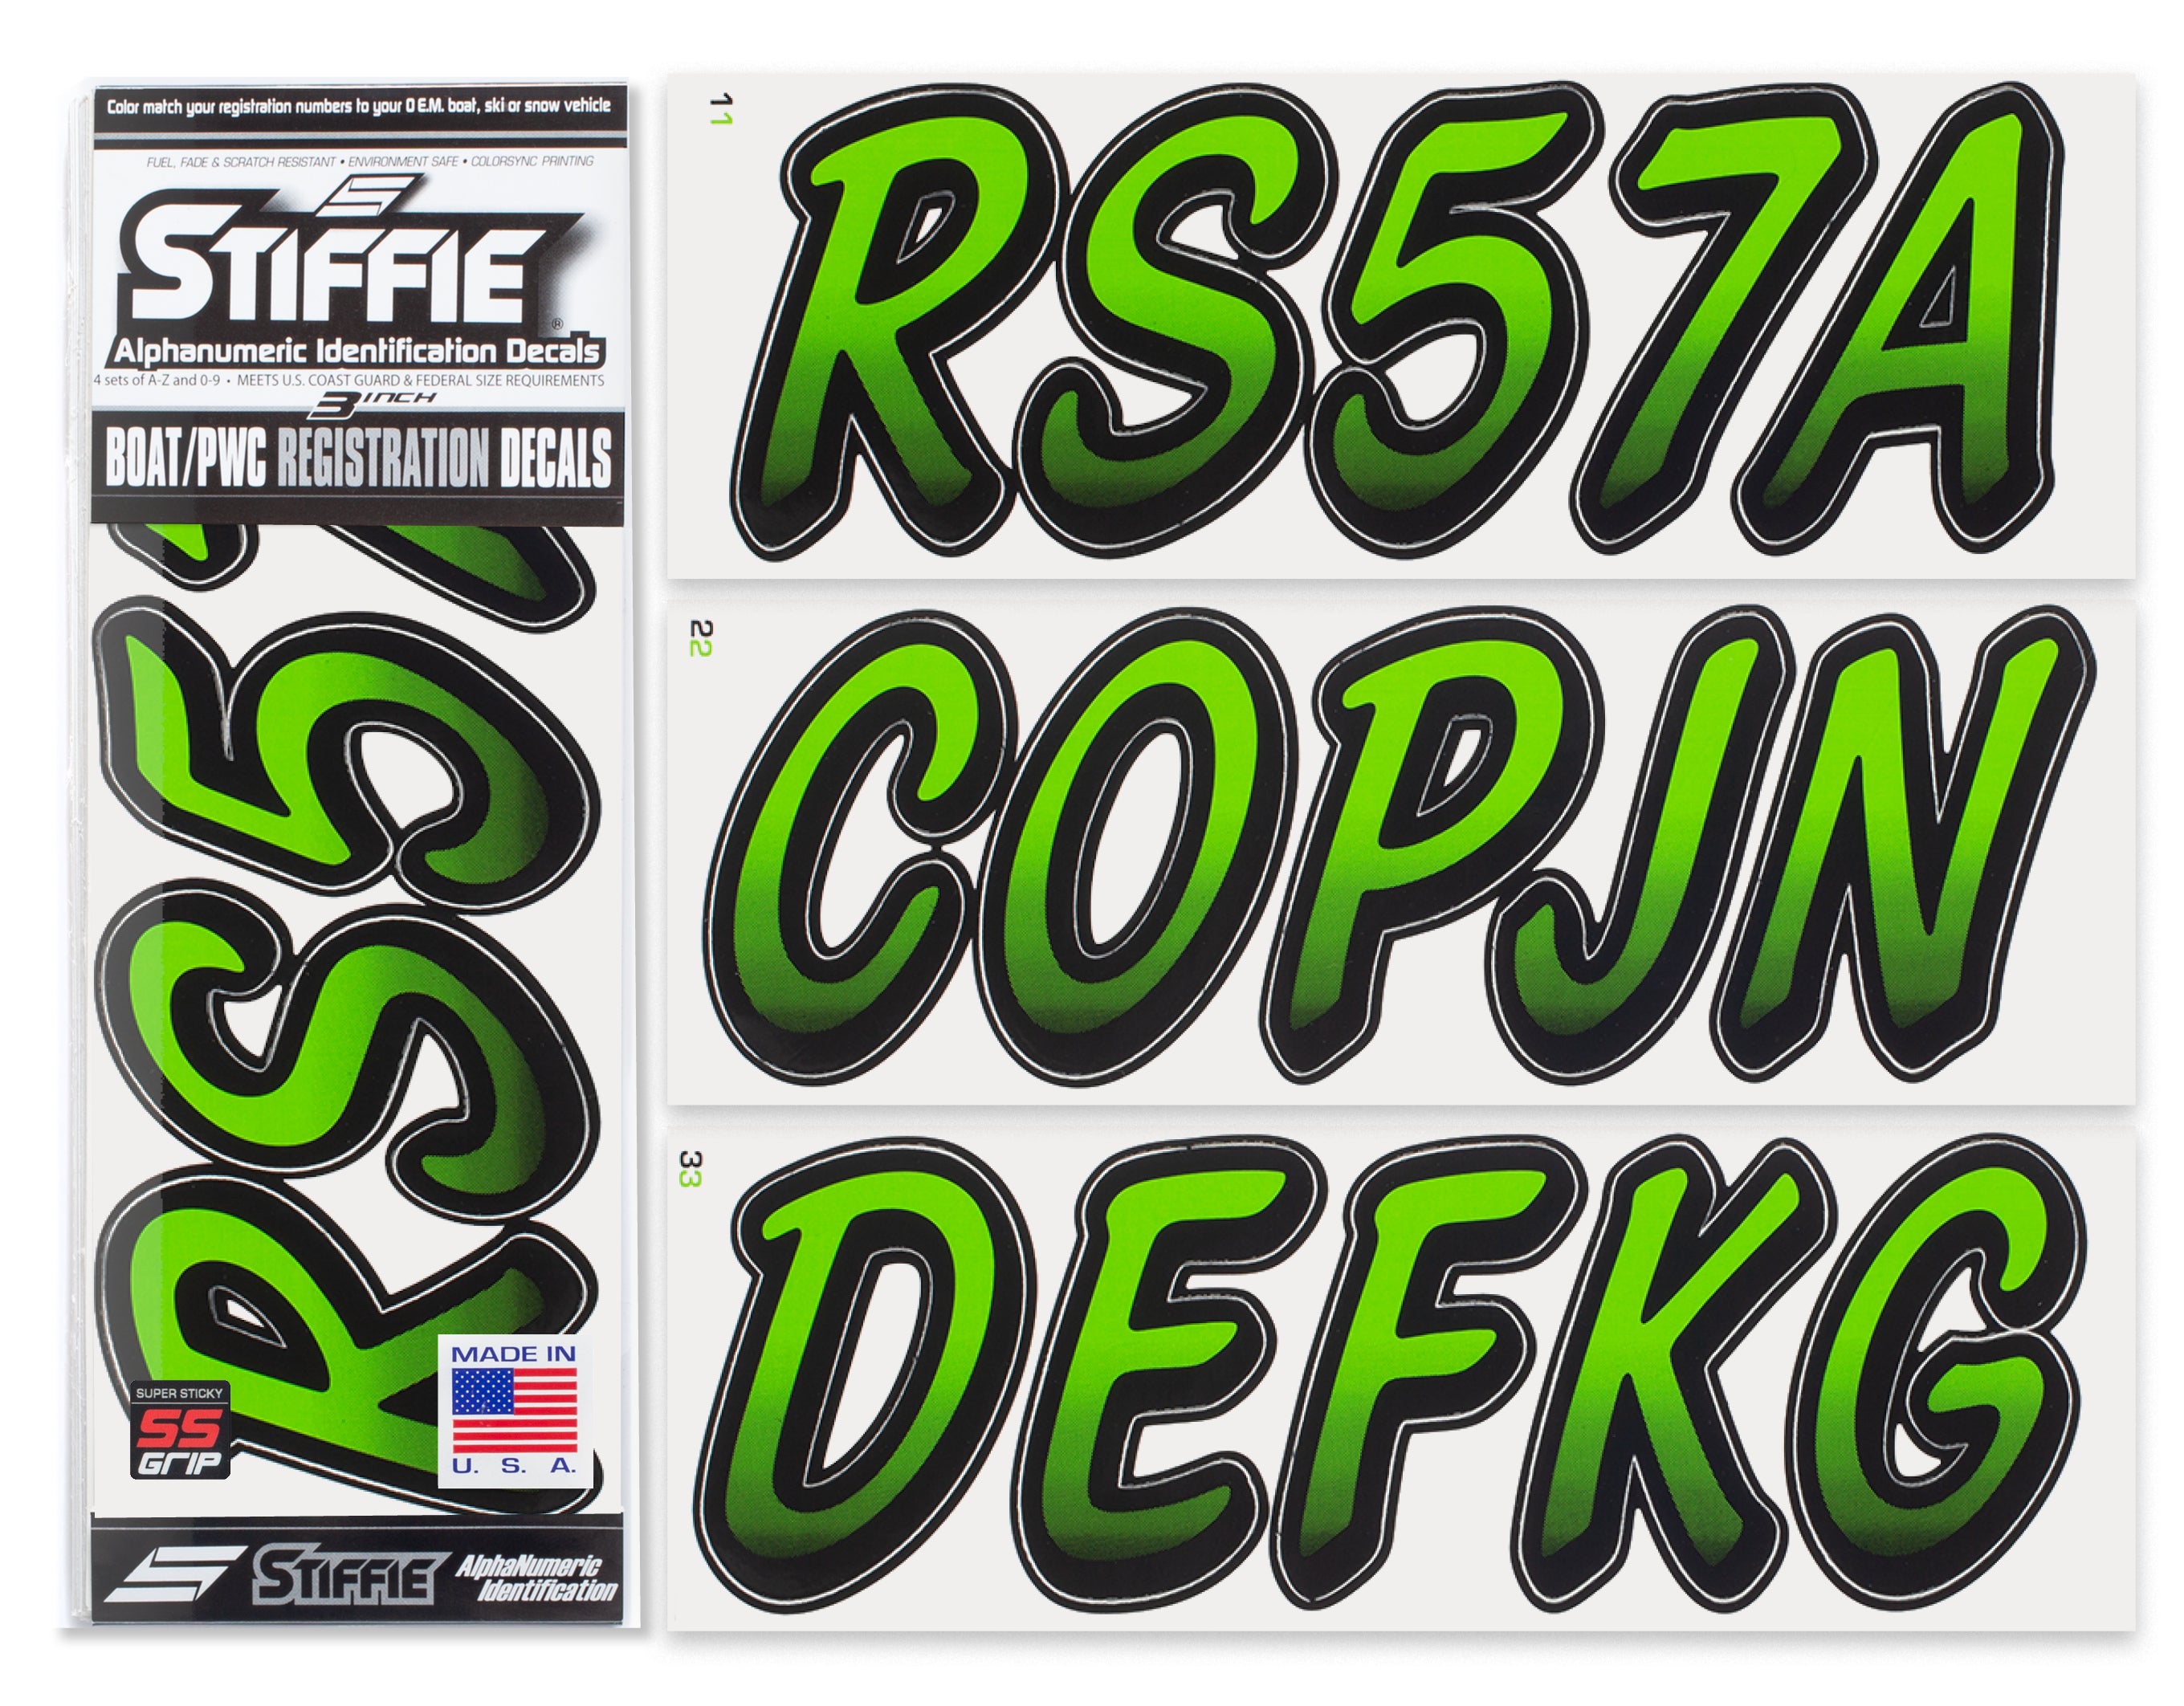 Stiffie Whipline Team Green/Black Super Sticky 3" Alpha Numeric Registration Identification Numbers Stickers Decals for Sea-Doo Spark, Inflatable Boats, Ribs, Hypalon/PVC, PWC and Boats.